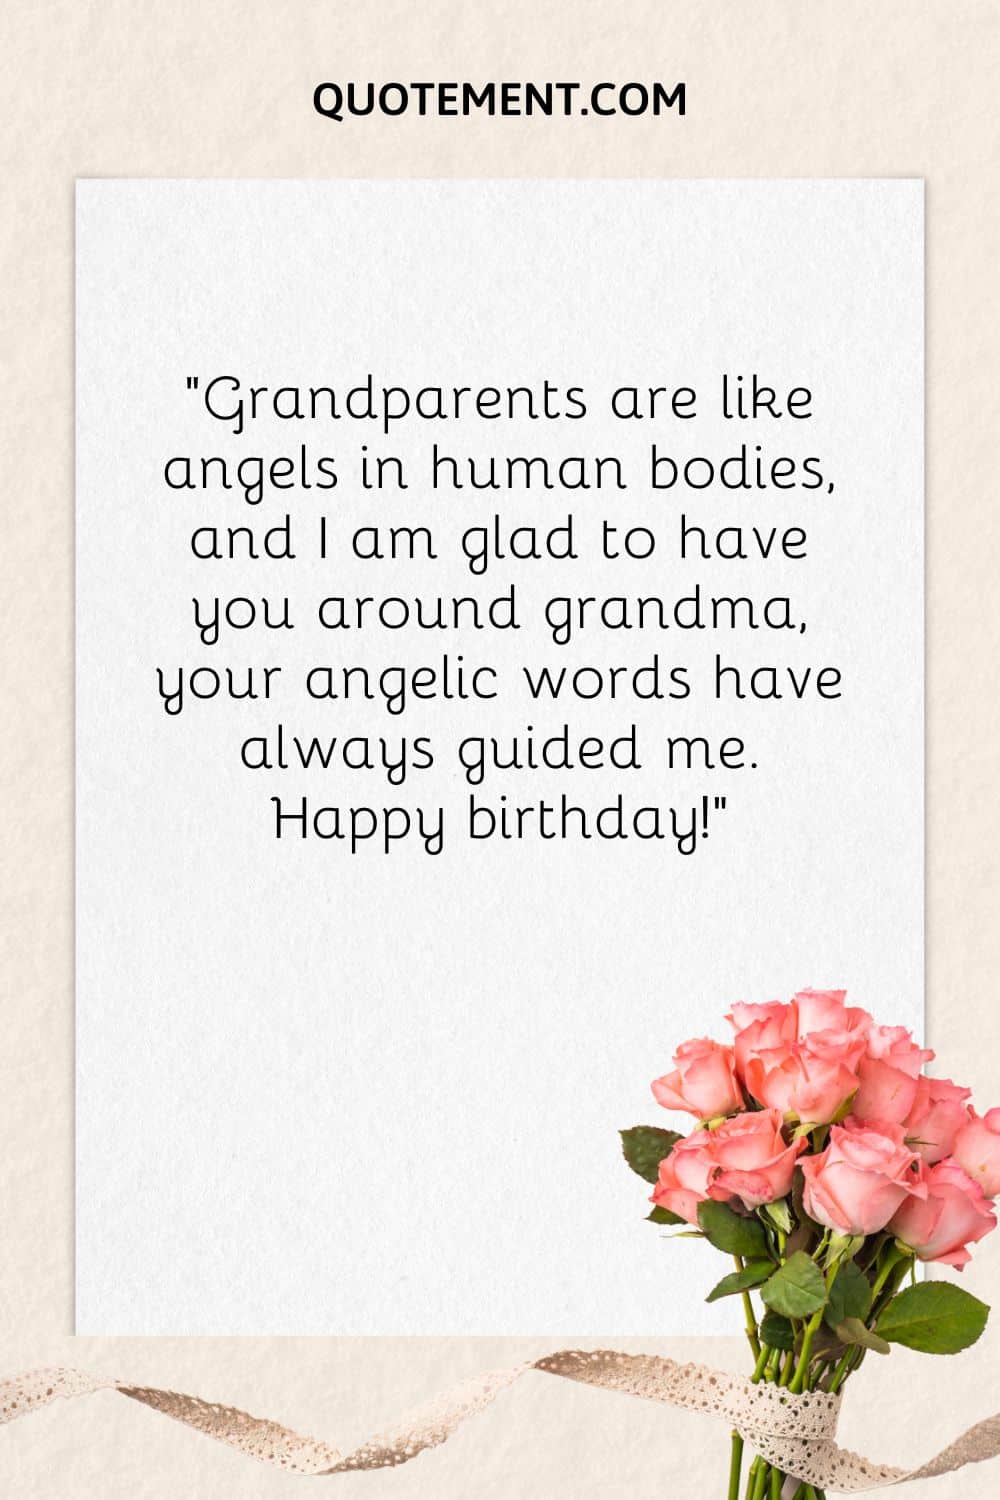 “Grandparents are like angels in human bodies, and I am glad to have you around grandma, your angelic words have always guided me. Happy birthday!”